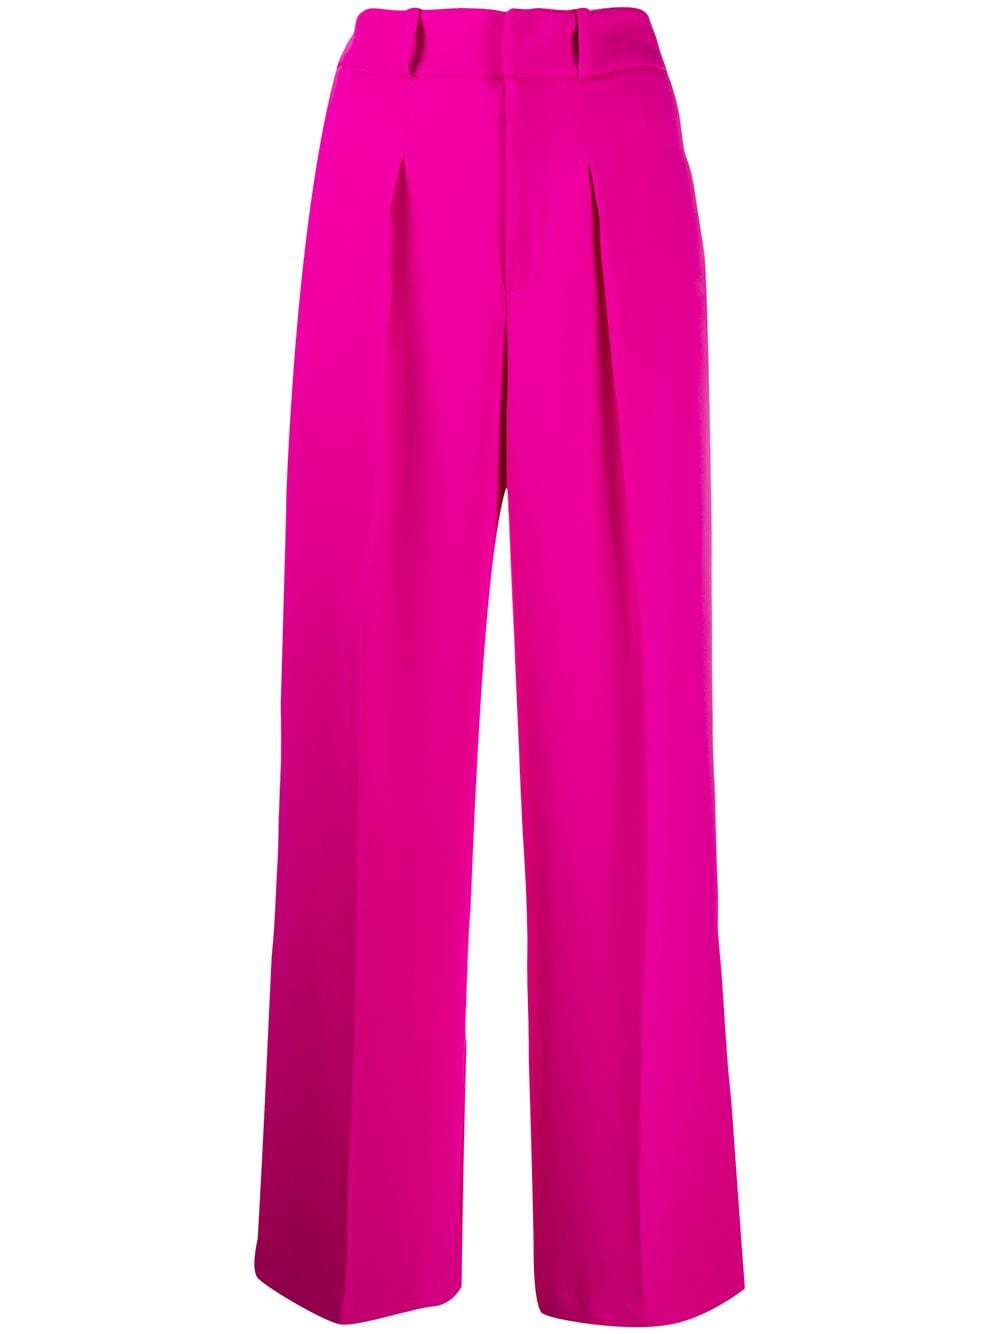 P.A.R.O.S.H PLEATED WIDE-LEG TROUSERS